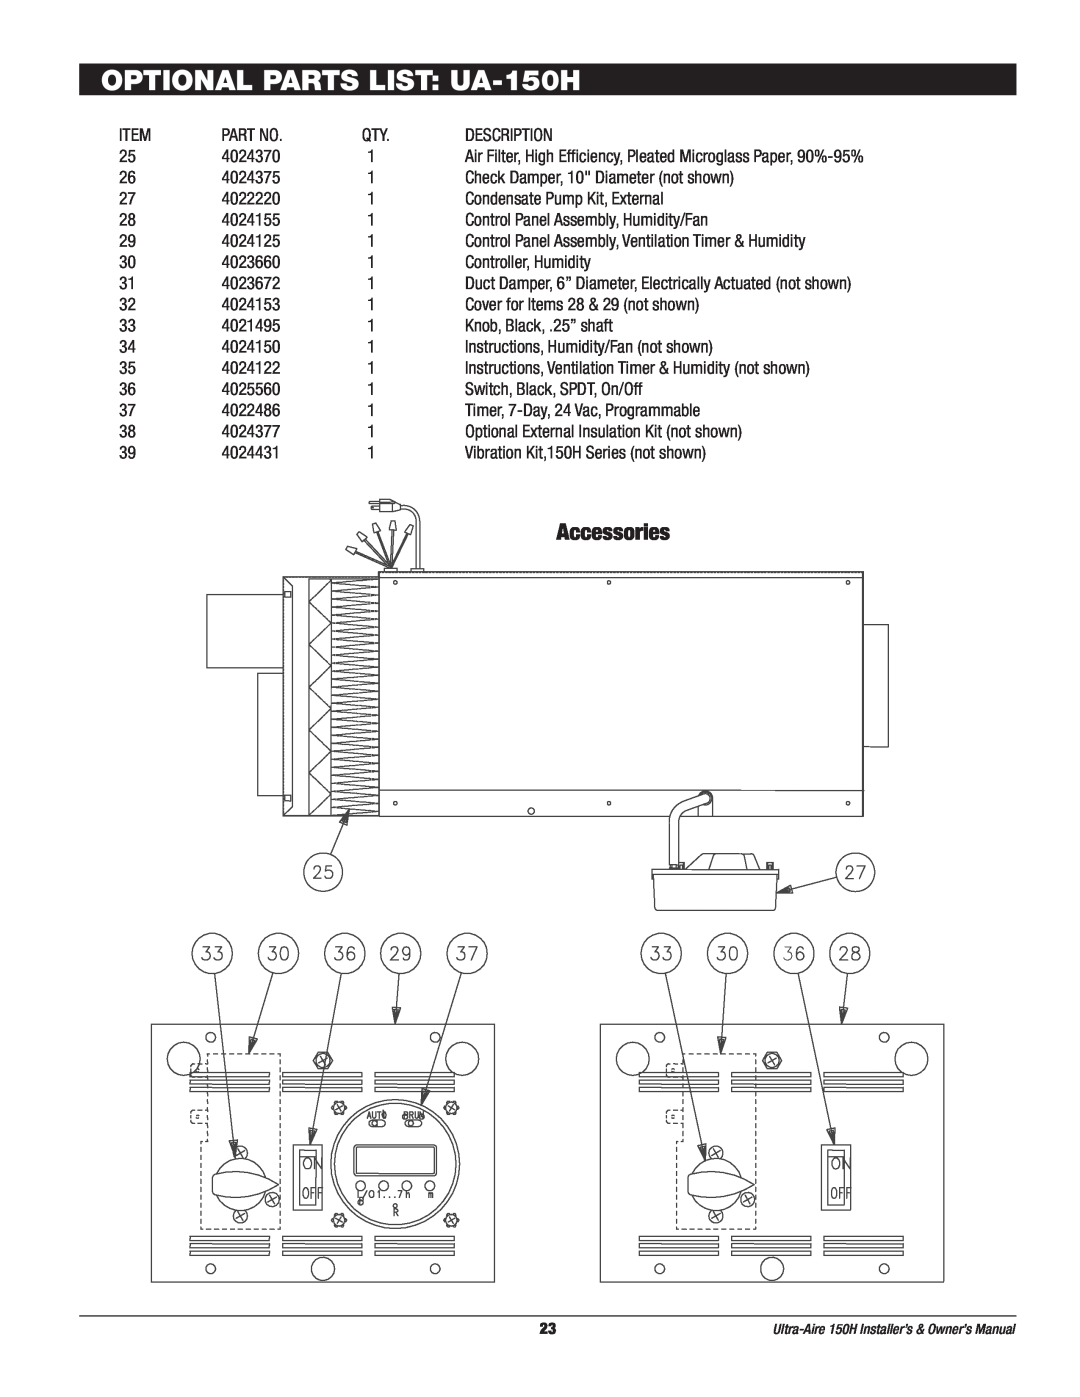 Therma-Stor Products Group owner manual OPTIONAL PARTS LIST UA-150H, Accessories 